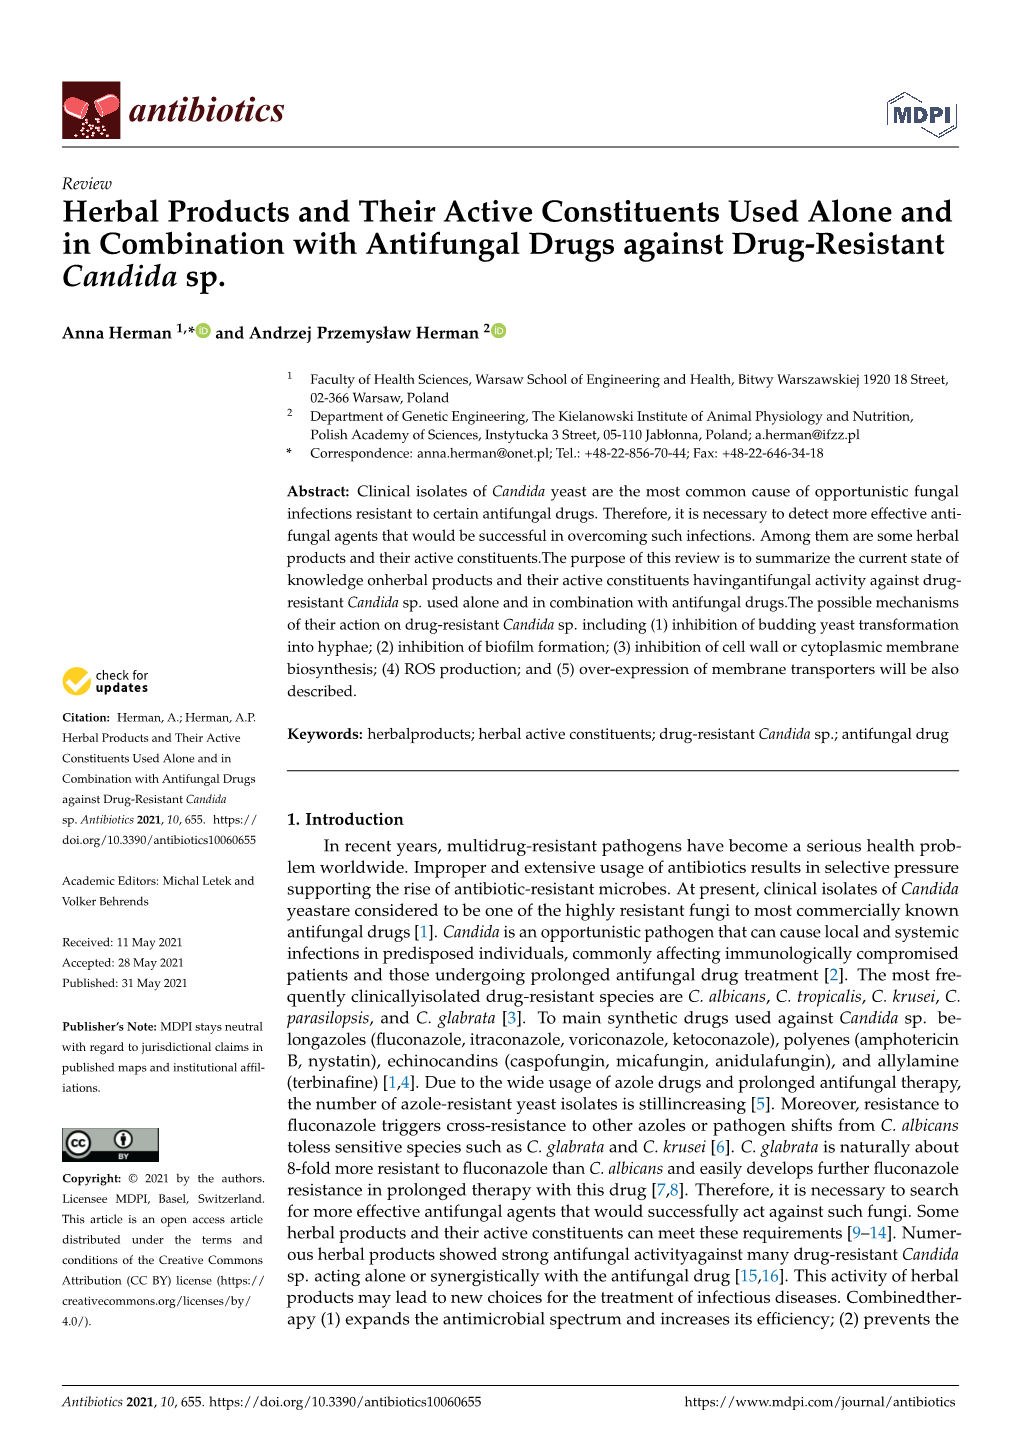 Herbal Products and Their Active Constituents Used Alone and in Combination with Antifungal Drugs Against Drug-Resistant Candida Sp